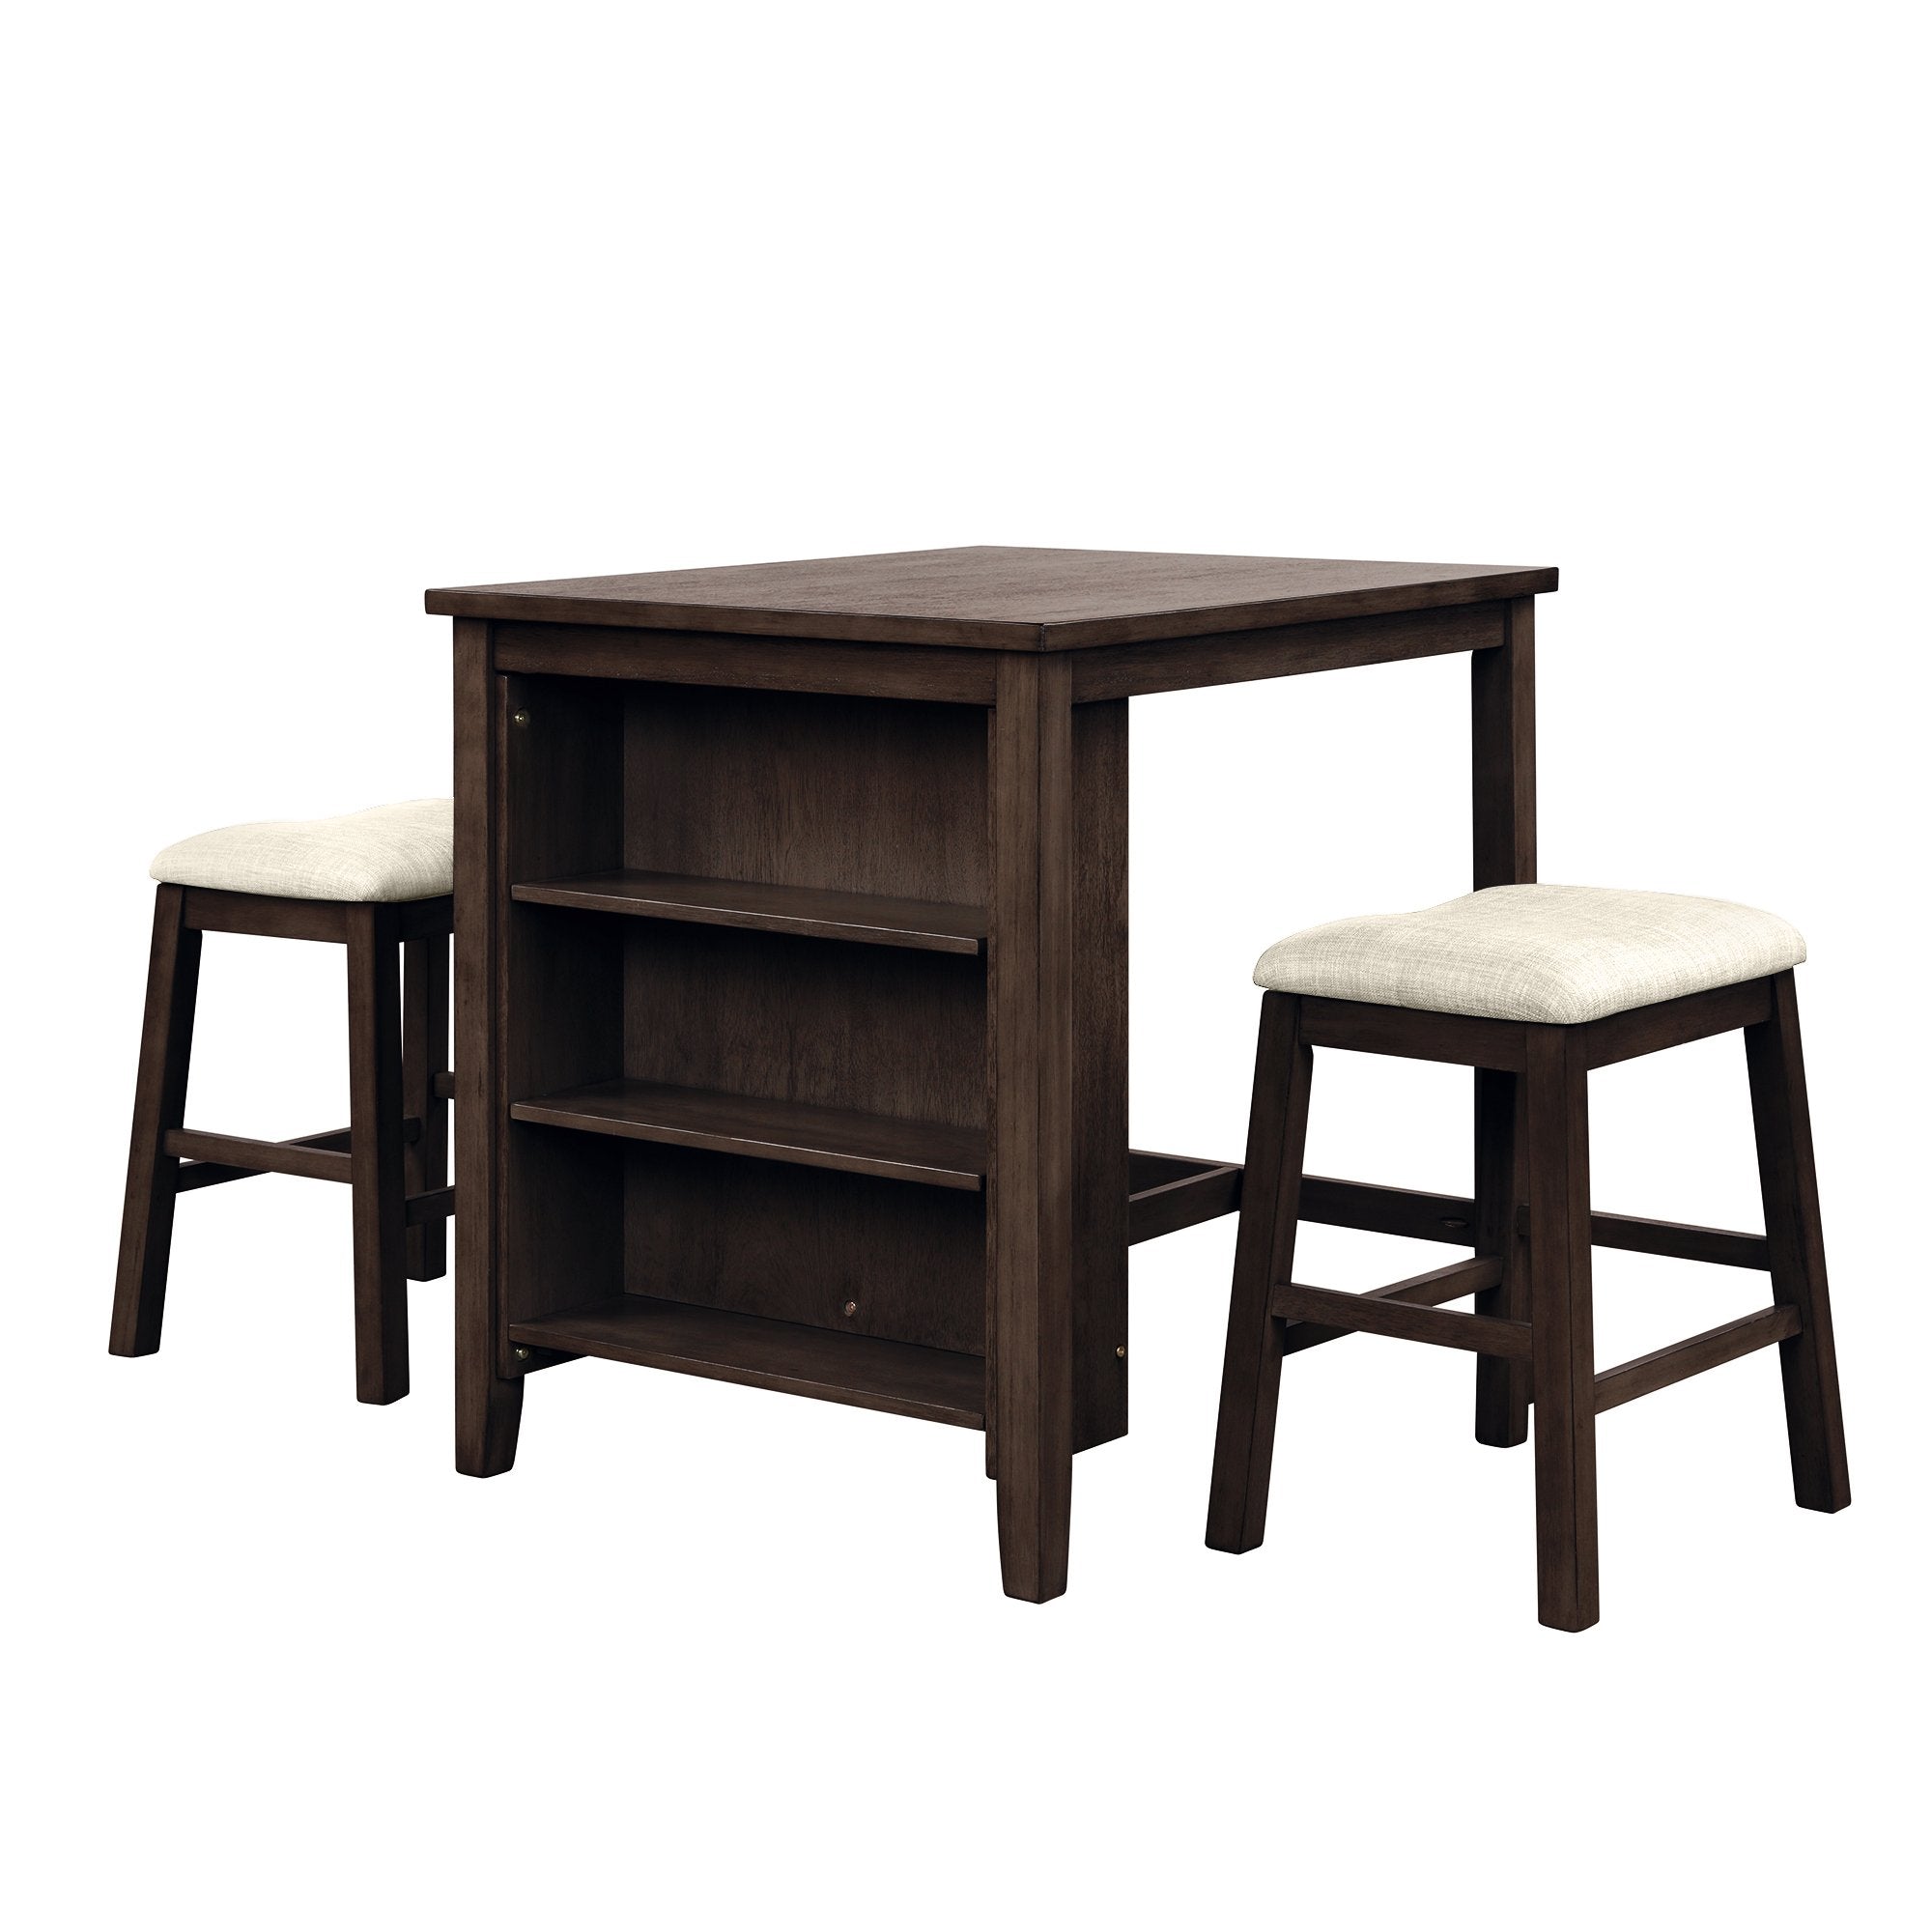 3 Piece Square Dining Table with Padded Stools, Table Set with Storage Shelf,Brown-Boyel Living